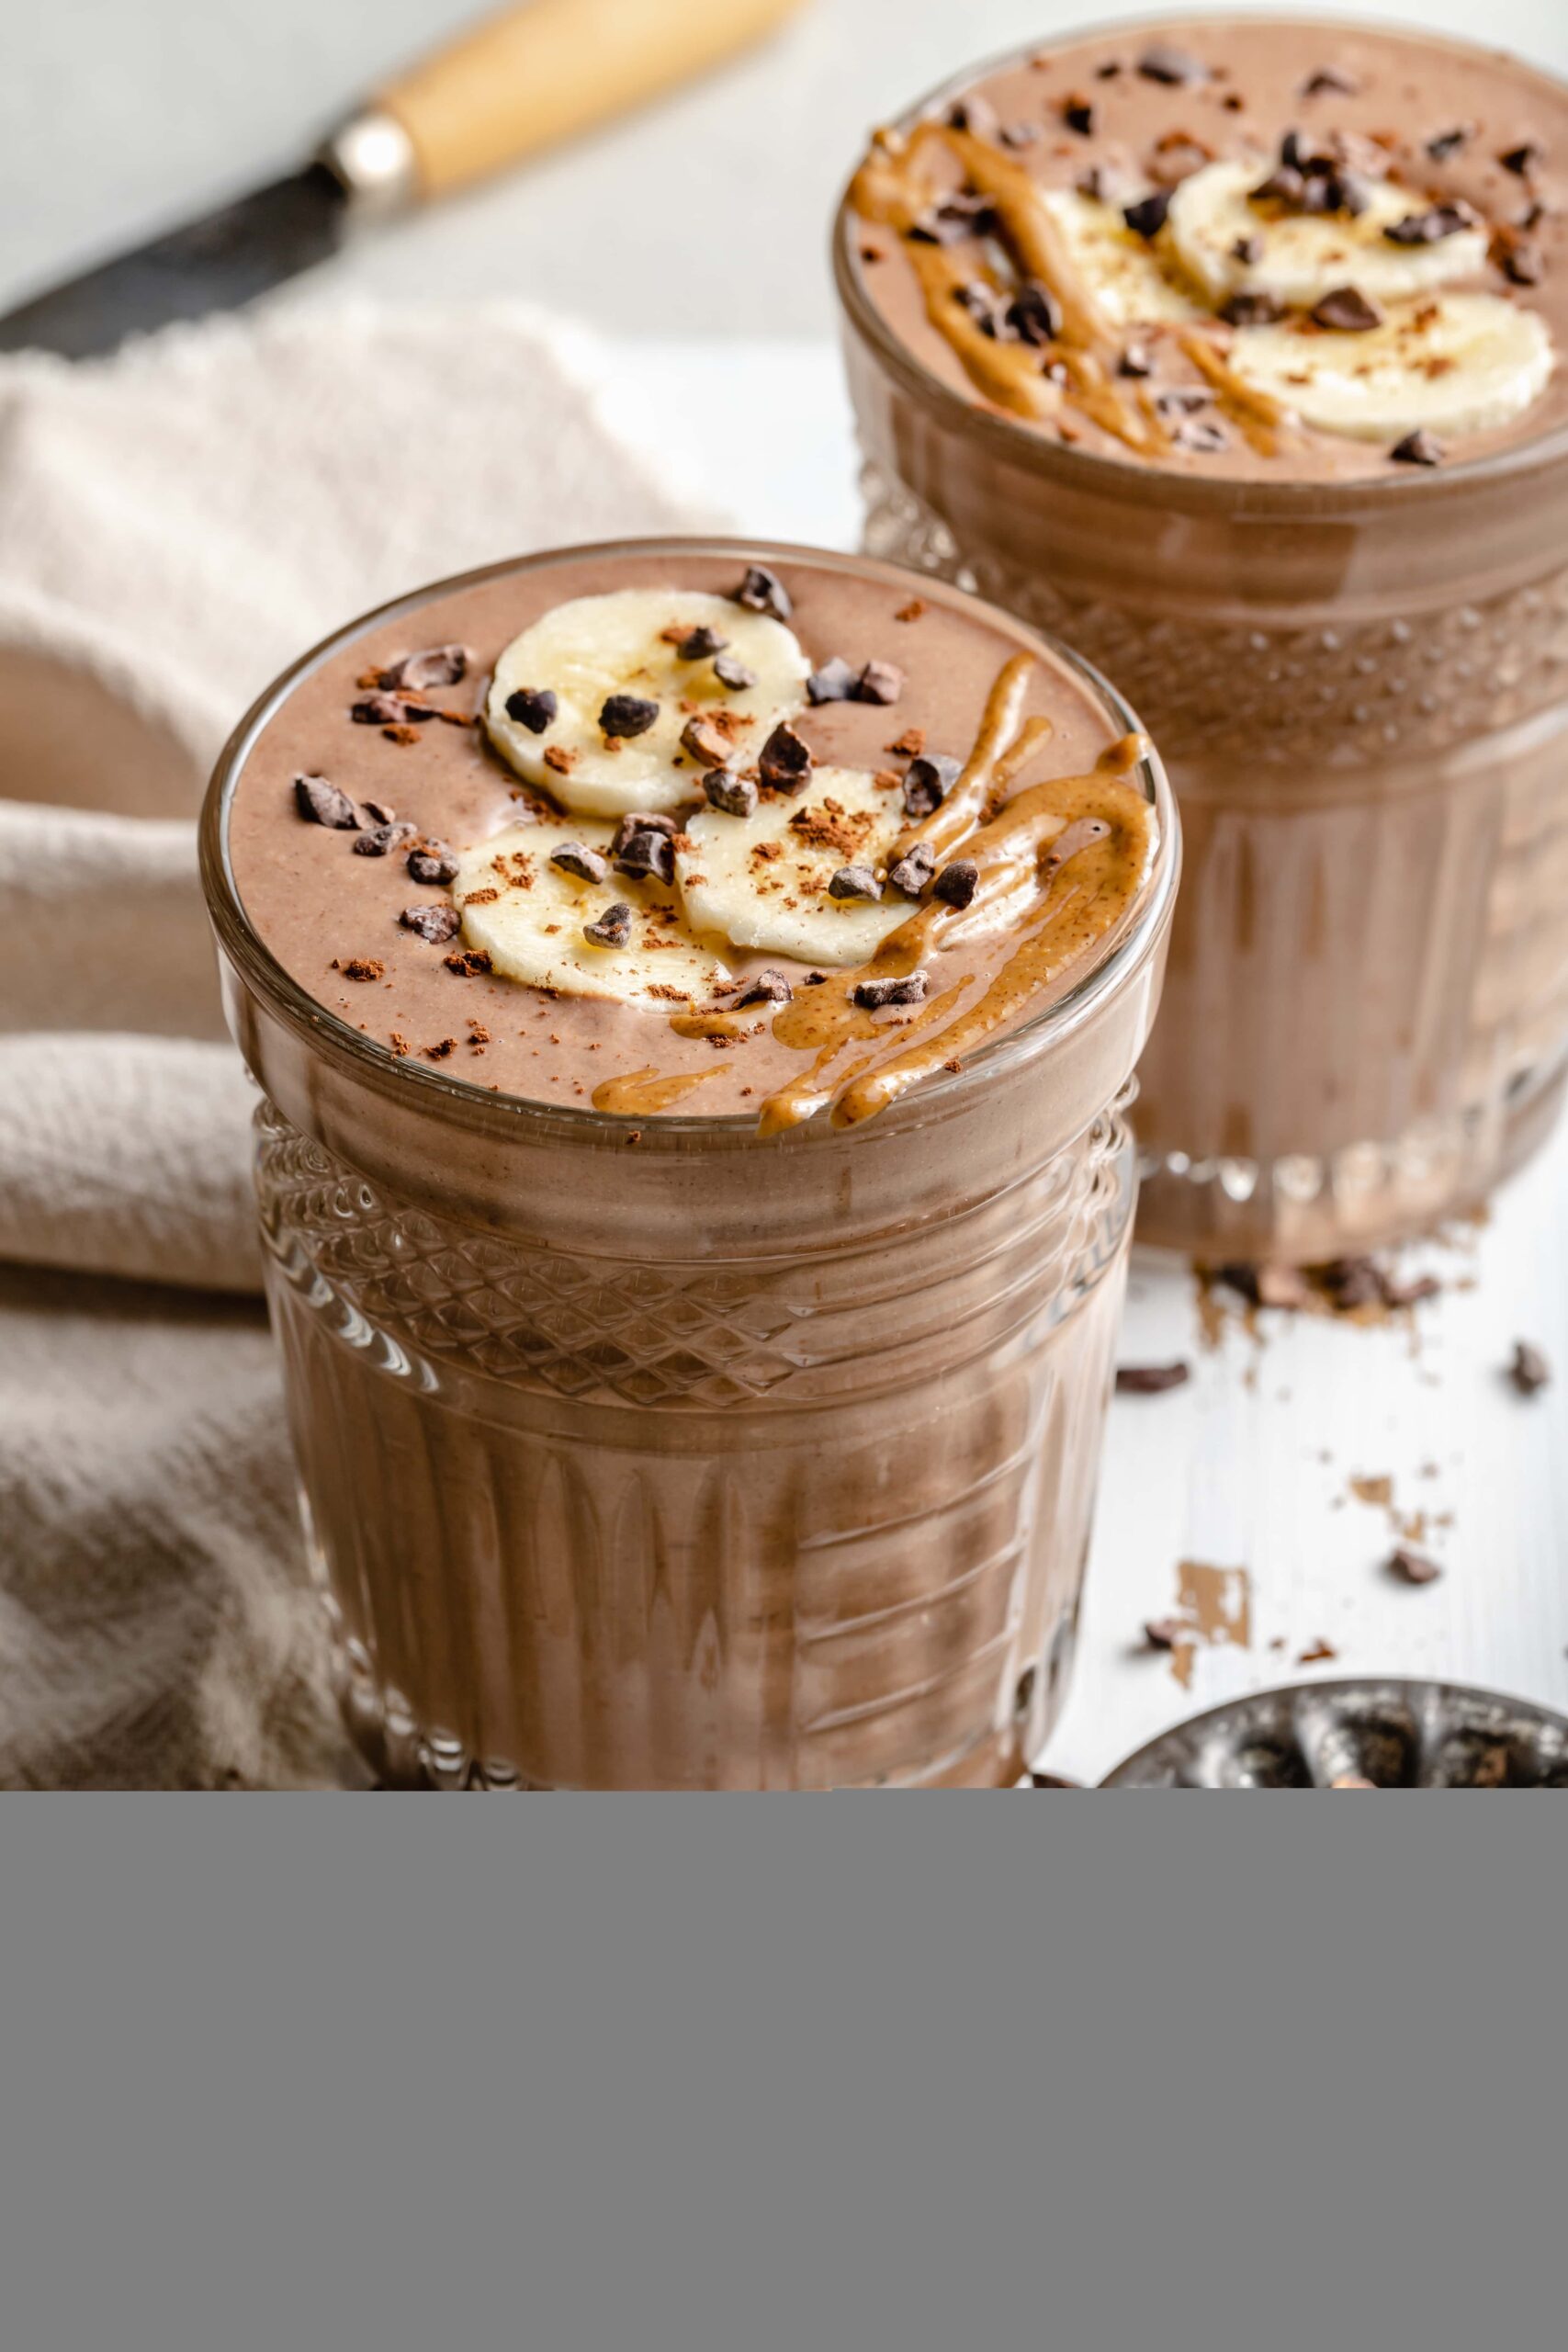 Chocolate Banana Smoothie - All the Healthy Things